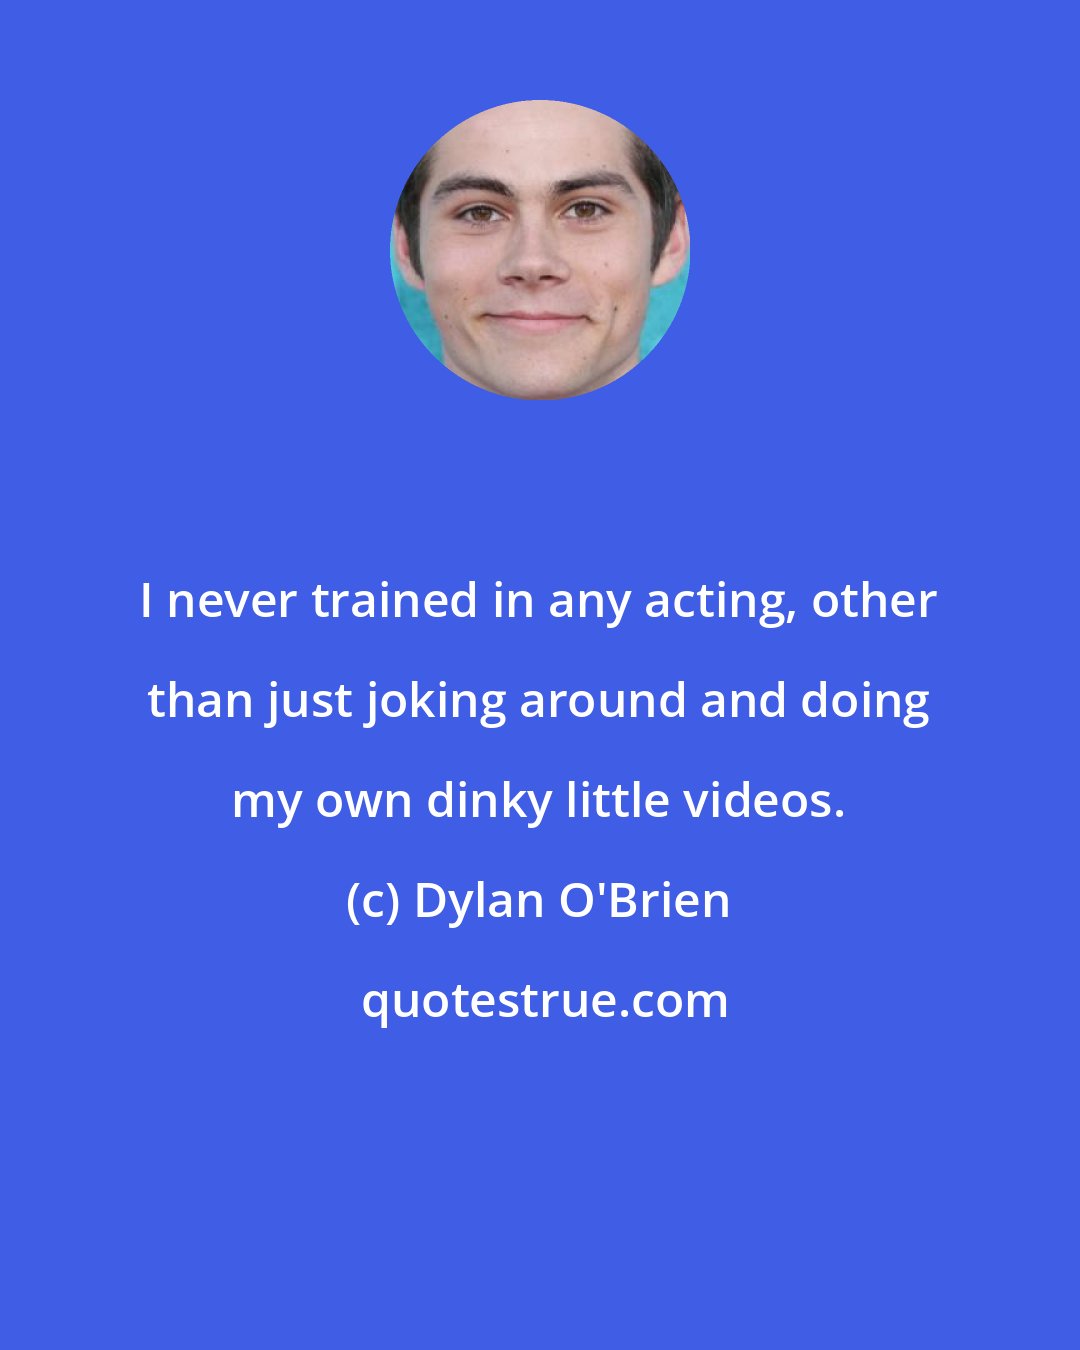 Dylan O'Brien: I never trained in any acting, other than just joking around and doing my own dinky little videos.